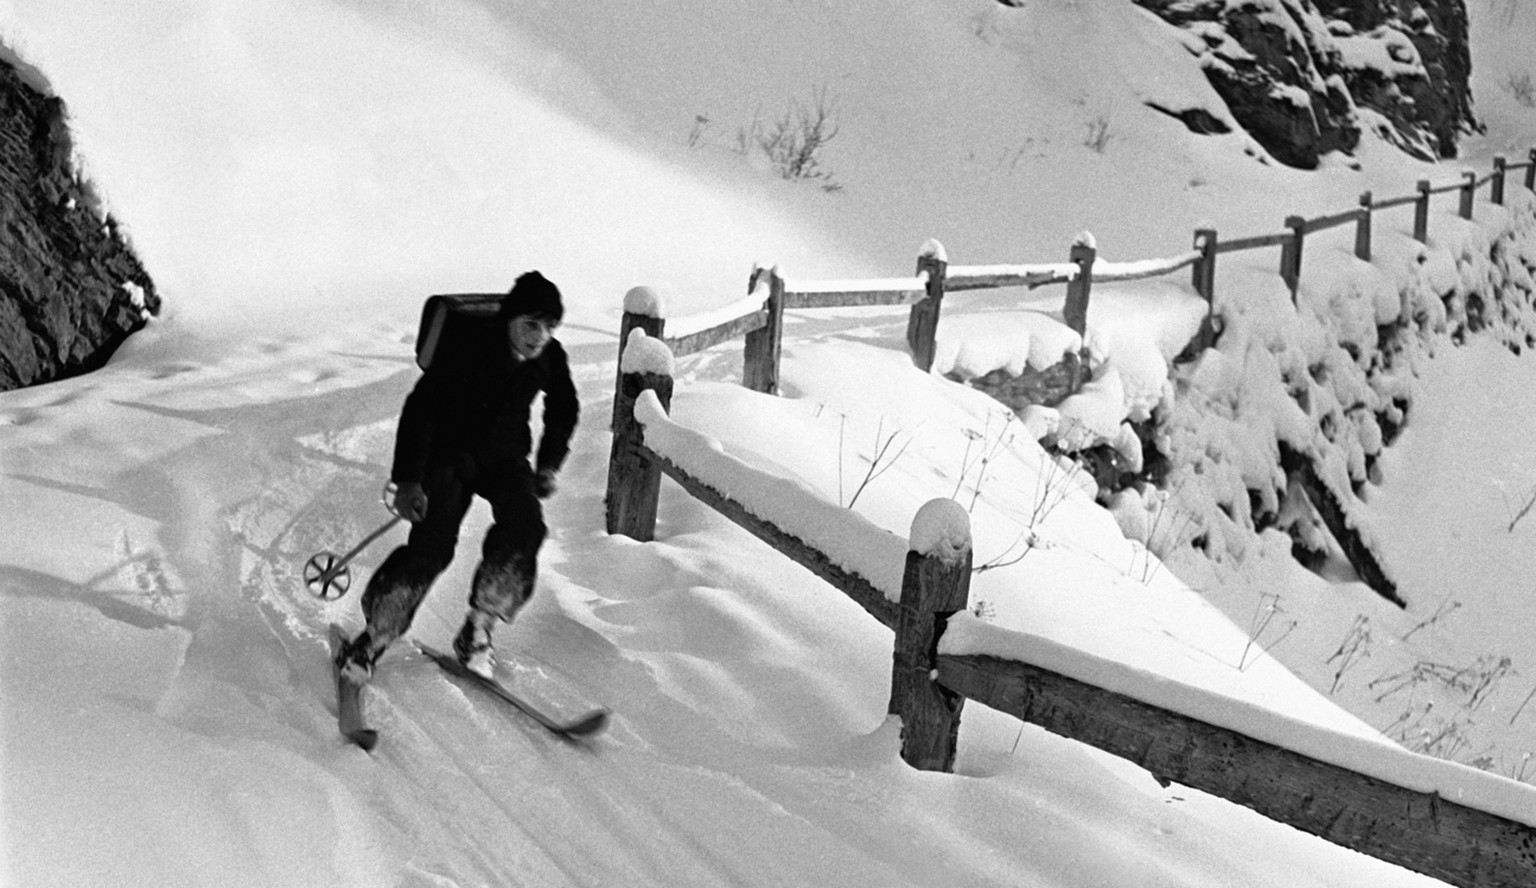 MILESTONES CATALOGUE - Village school Cresta - Croet near Avers in the canton of Grisons, Switzerland: A pupil rides home on his skis, pictured on February 2, 1942. (KEYSTONE/PHOTOPRESS-ARCHIV/Walter  ...